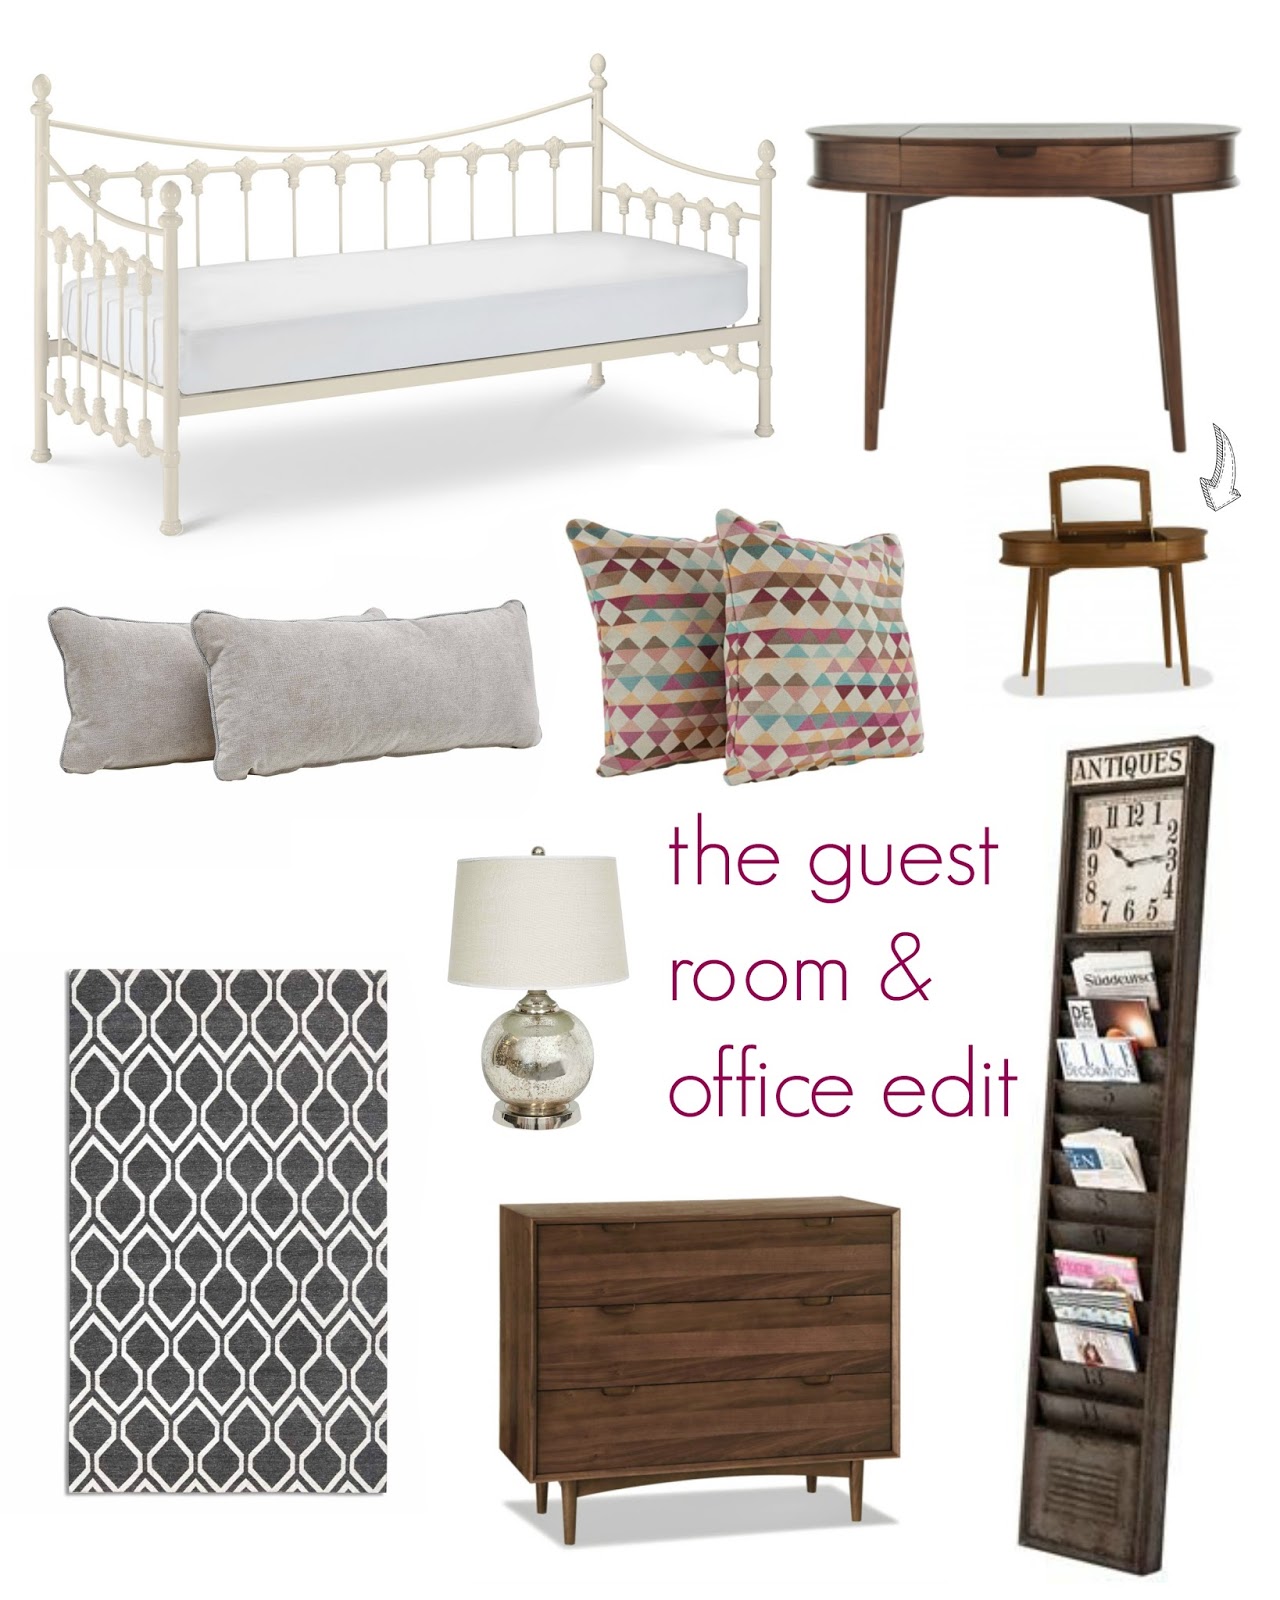 mamasvib , V. I. BEDROOM: How to create the perfect guest room - and office space 